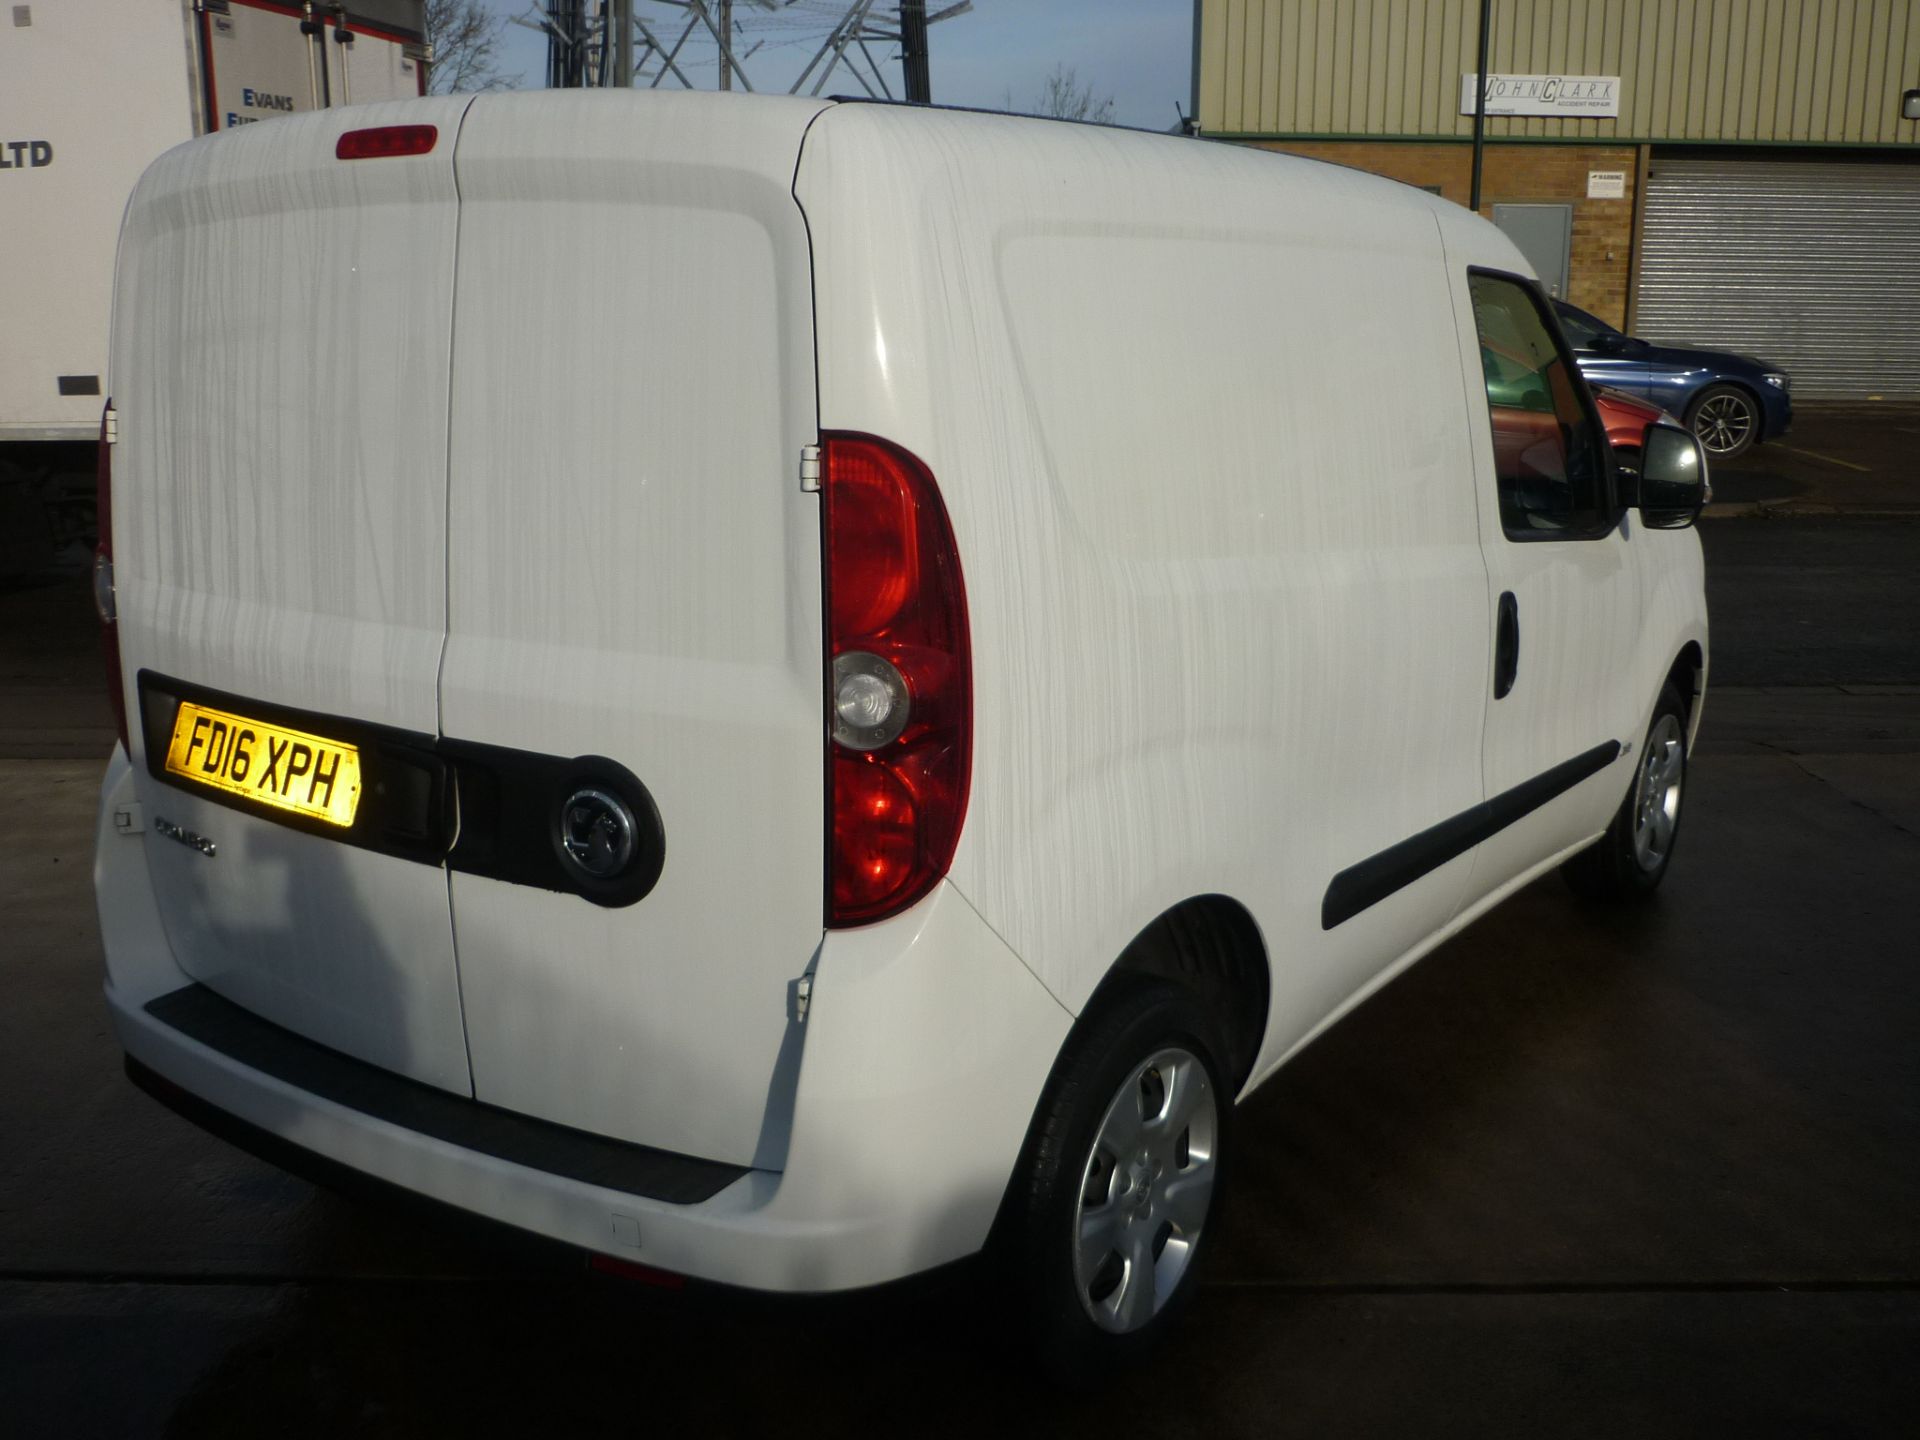 2016/16 REG VAUXHALL COMBO 2000 L1H1 CDTI SPORTIVE 1.25 DIESEL PANEL VAN, SHOWING 0 FORMER KEEPERS - Image 3 of 8